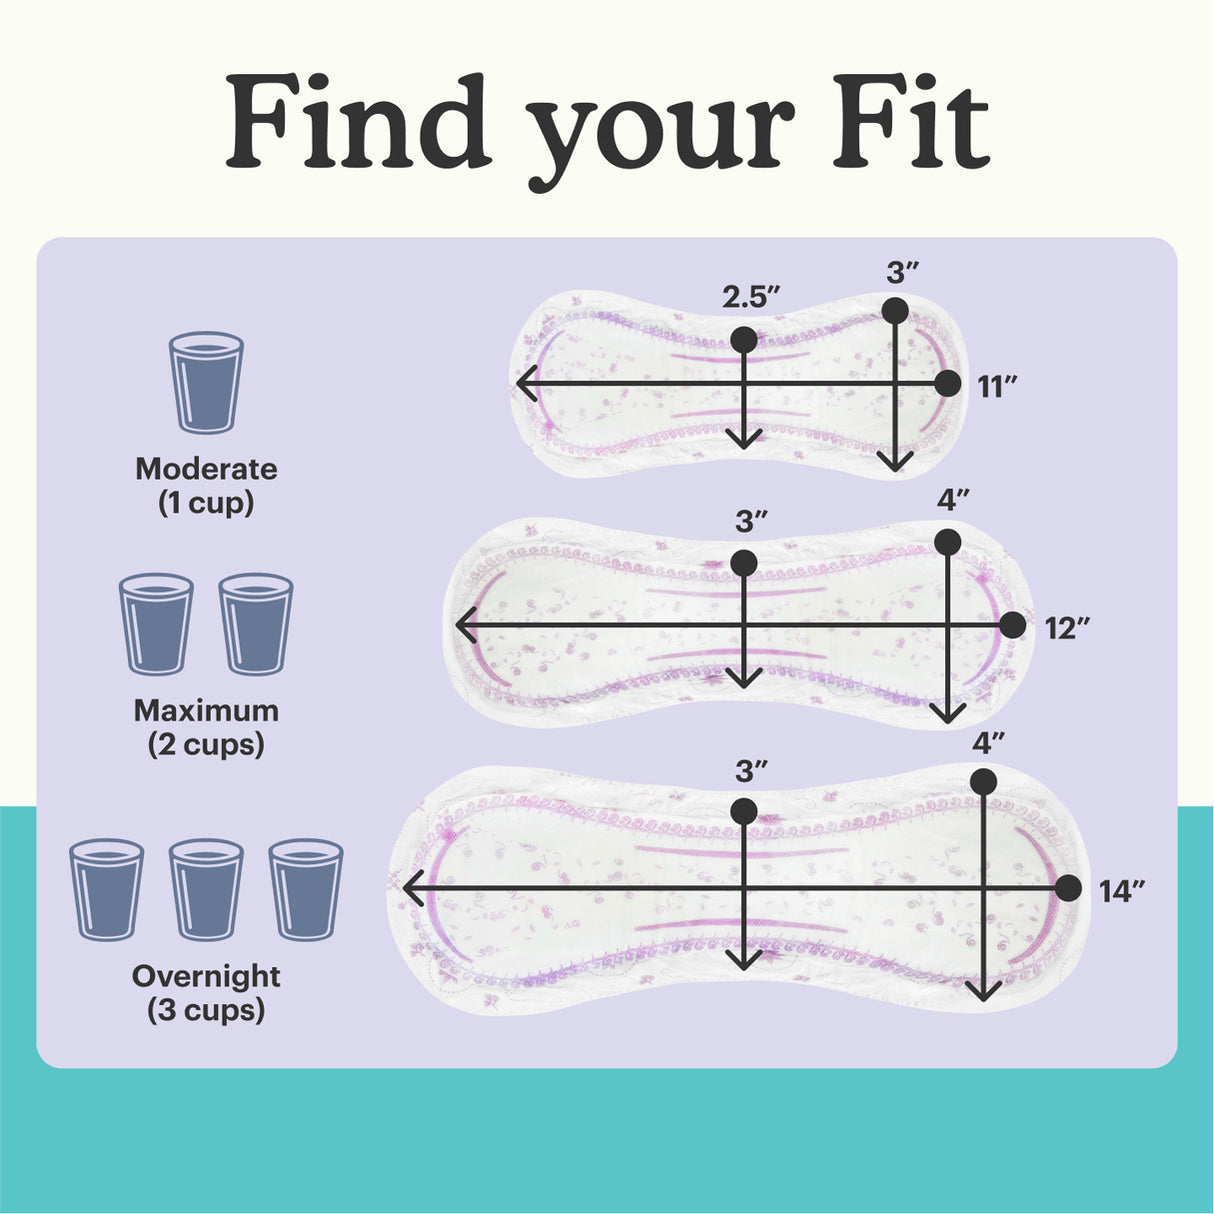 Find your fit size chart with number of cups varying by absorbency